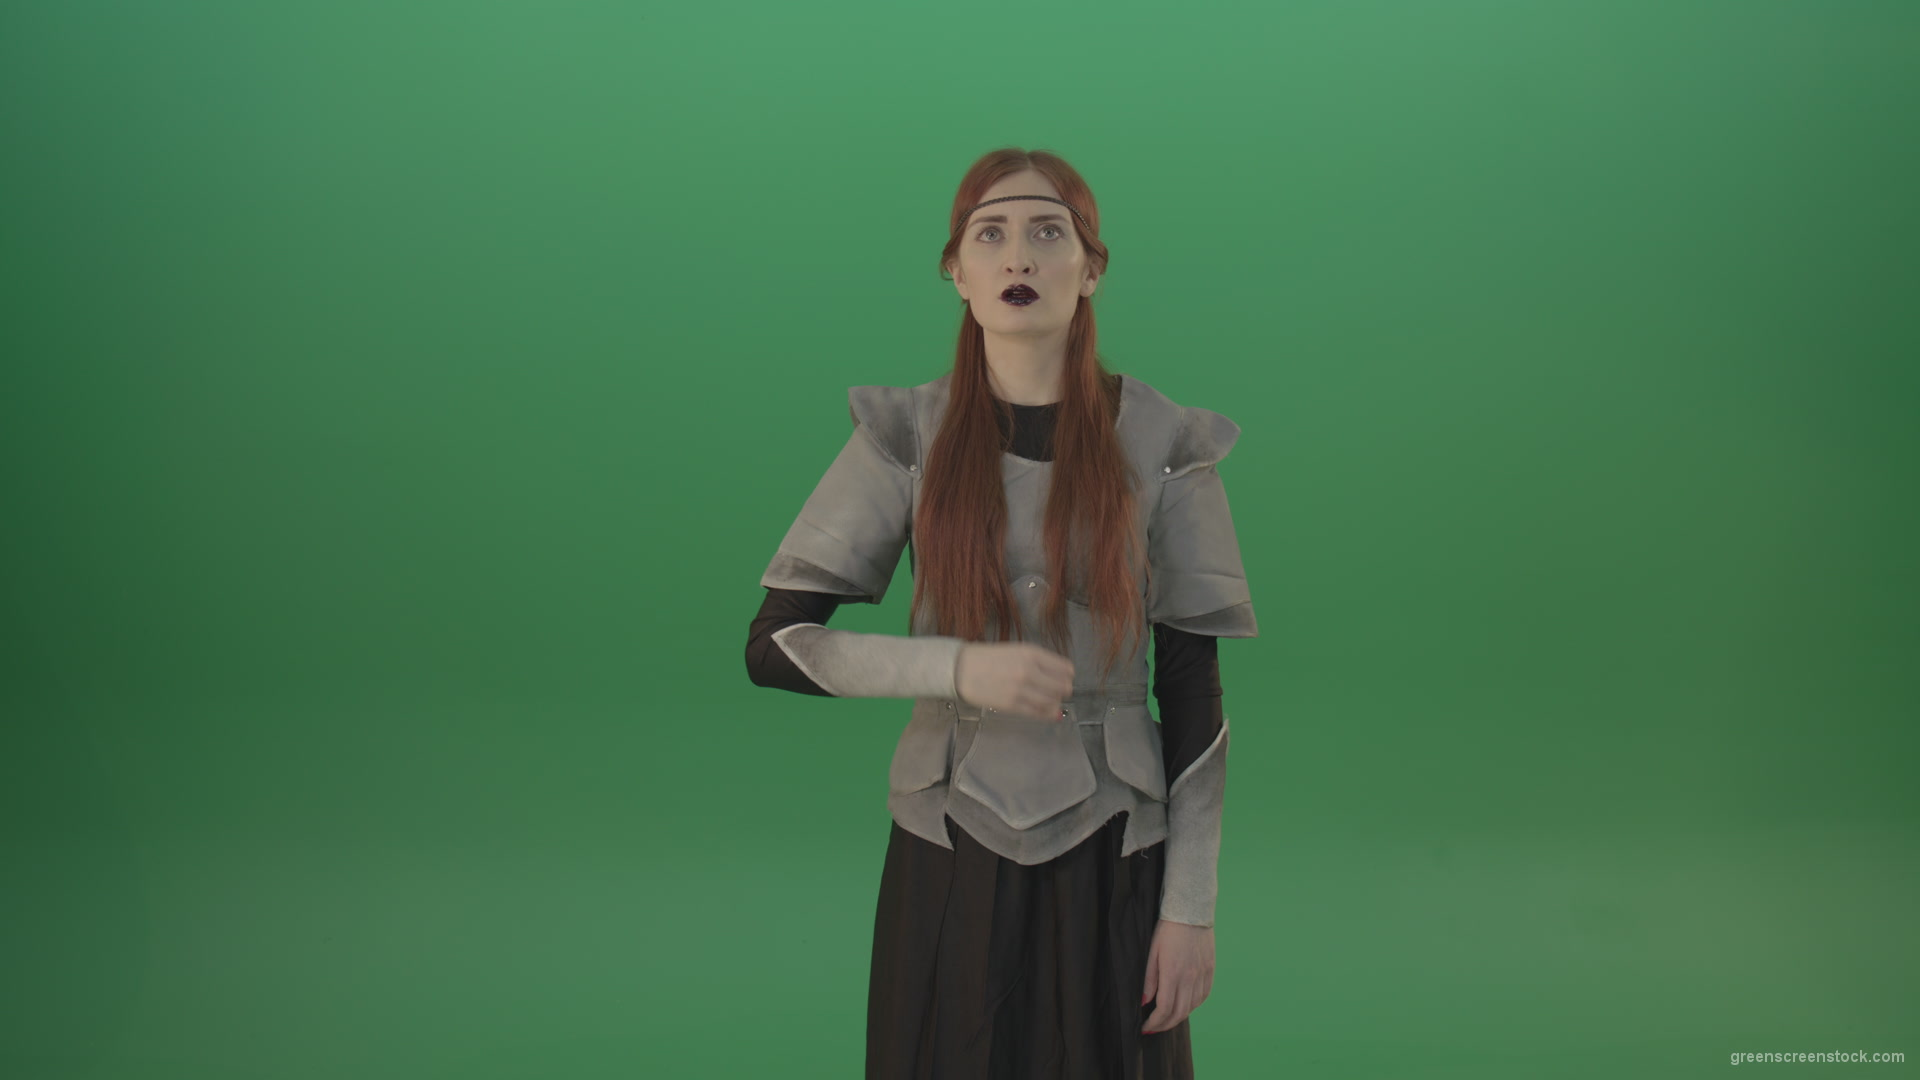 Actress-red-hair-girl-in-a-medieval-war-dress-crosses-praying-to-God-on-green-screen_004 Green Screen Stock